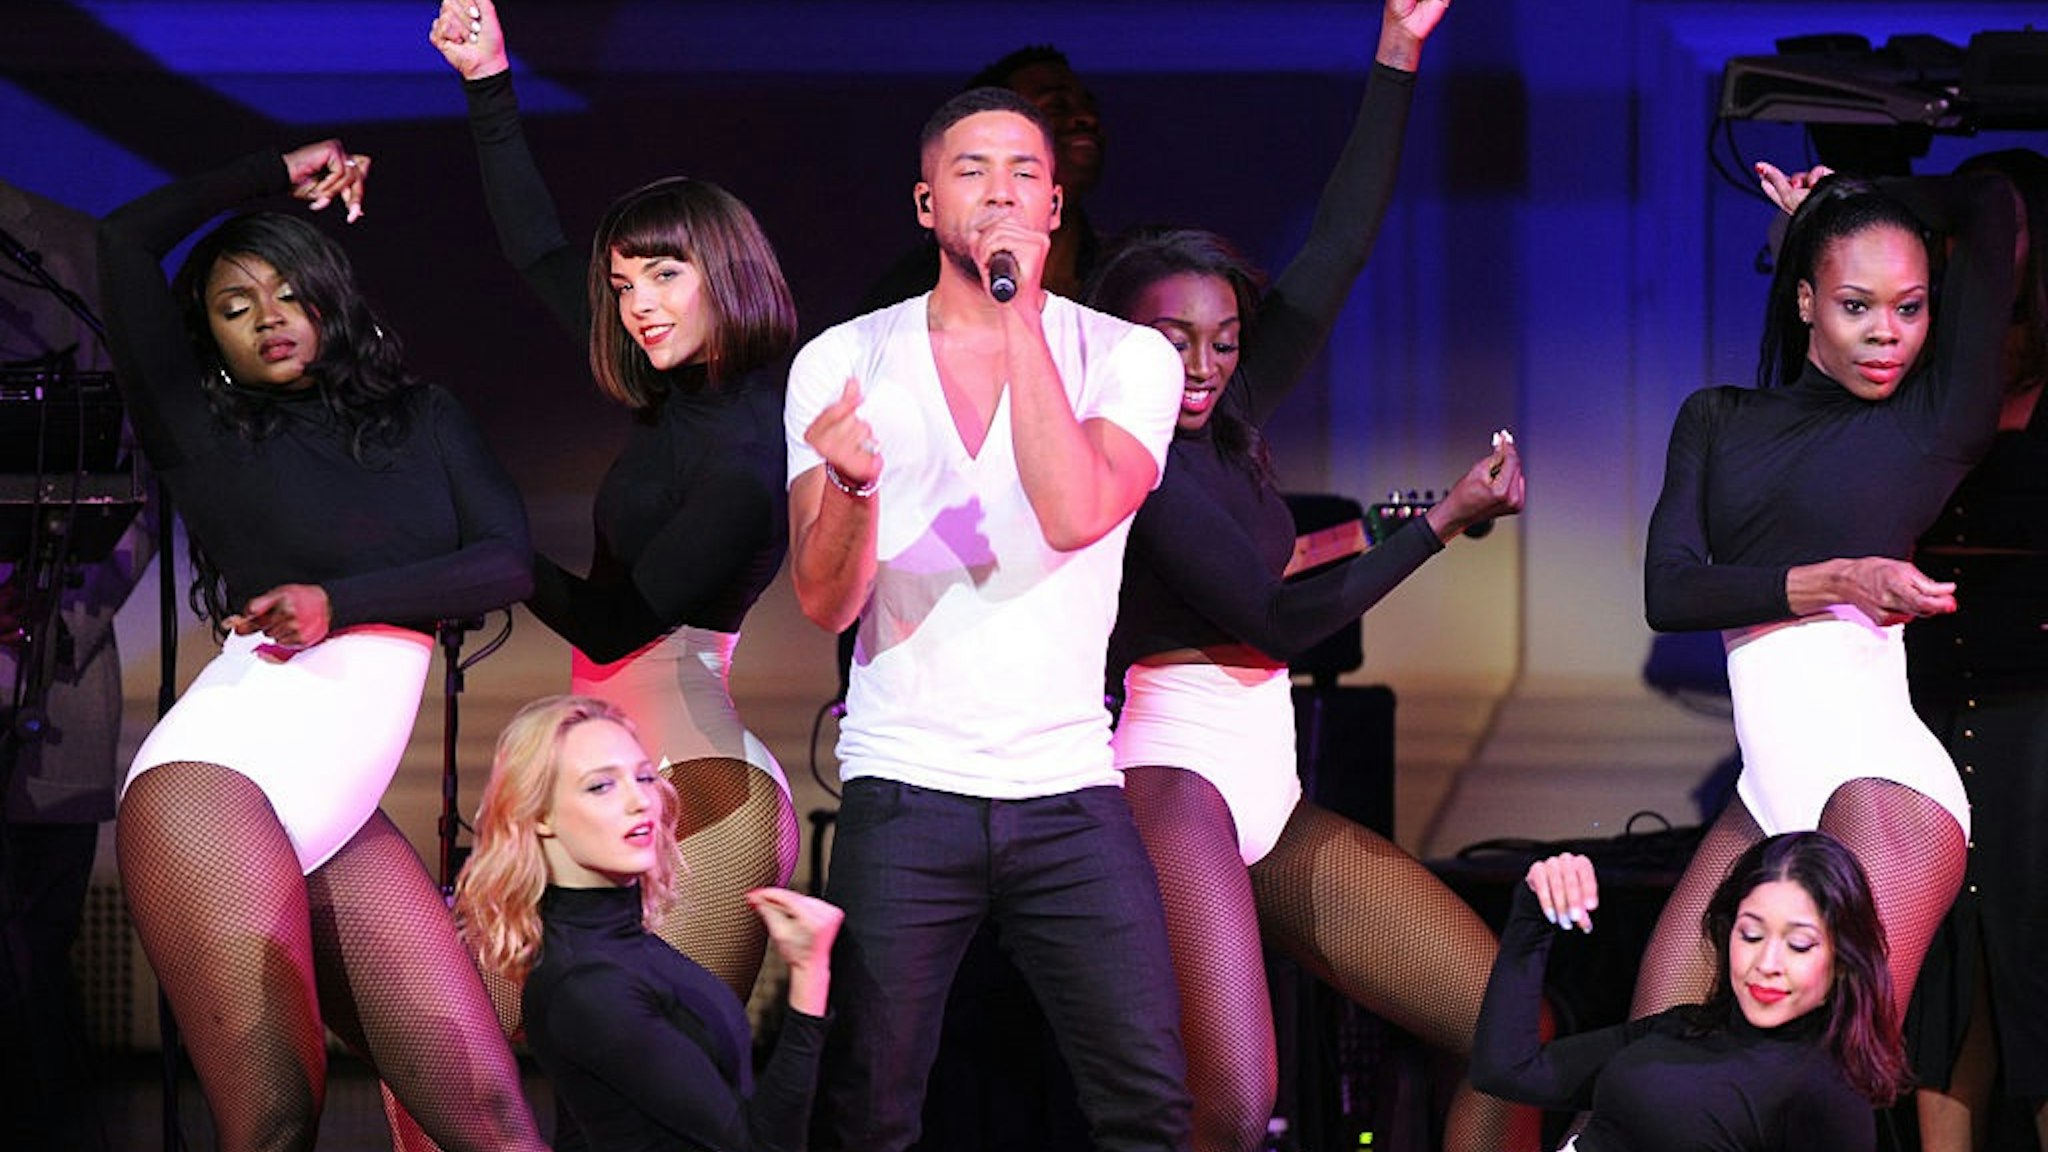 EMPIRE Cast member Jussie Smollett performs live at the EMPIRE Season Two season premiere event at Carnegie Hall on Saturday, Sept. 12 in New York, NY. Season Two premieres Wednesday, Sept. 23 (9:00-10:00 PM ET/PT) on FOX. (Photo by FOX via Getty Images)